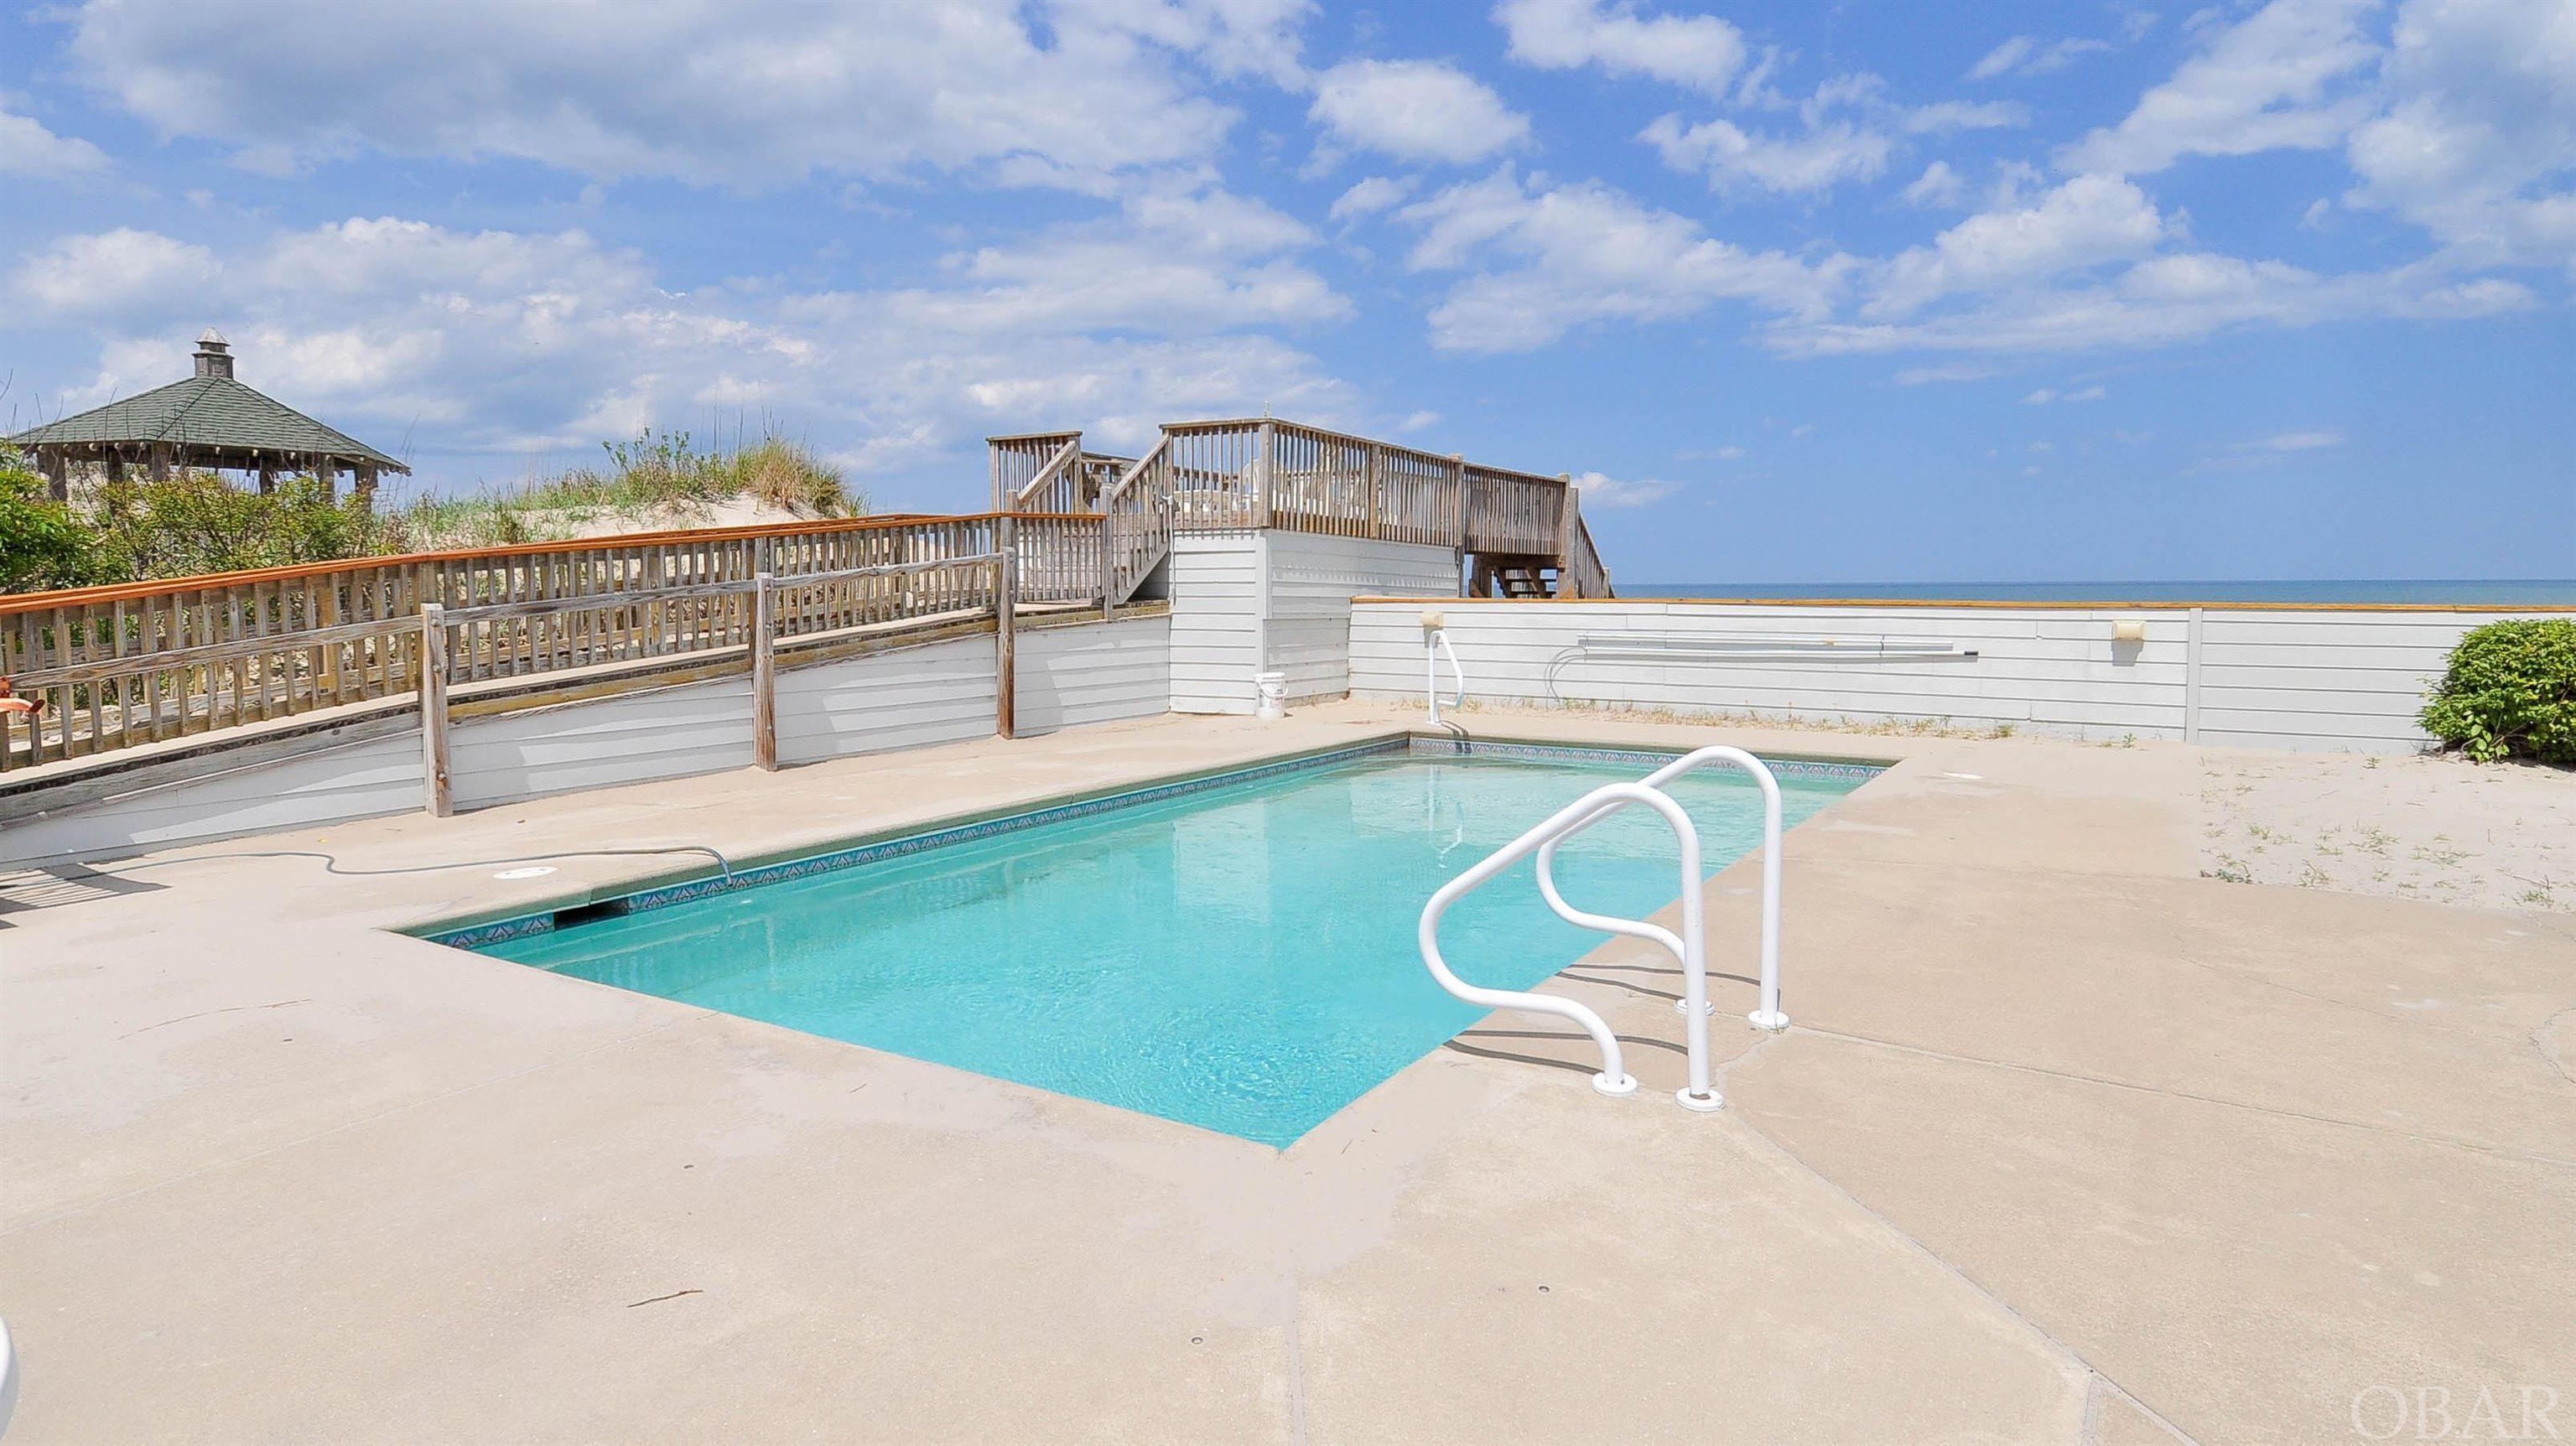 Corolla, North Carolina 27927, 4 Bedrooms Bedrooms, ,3 BathroomsBathrooms,Single family - detached,For sale,Lighthouse Drive,118700